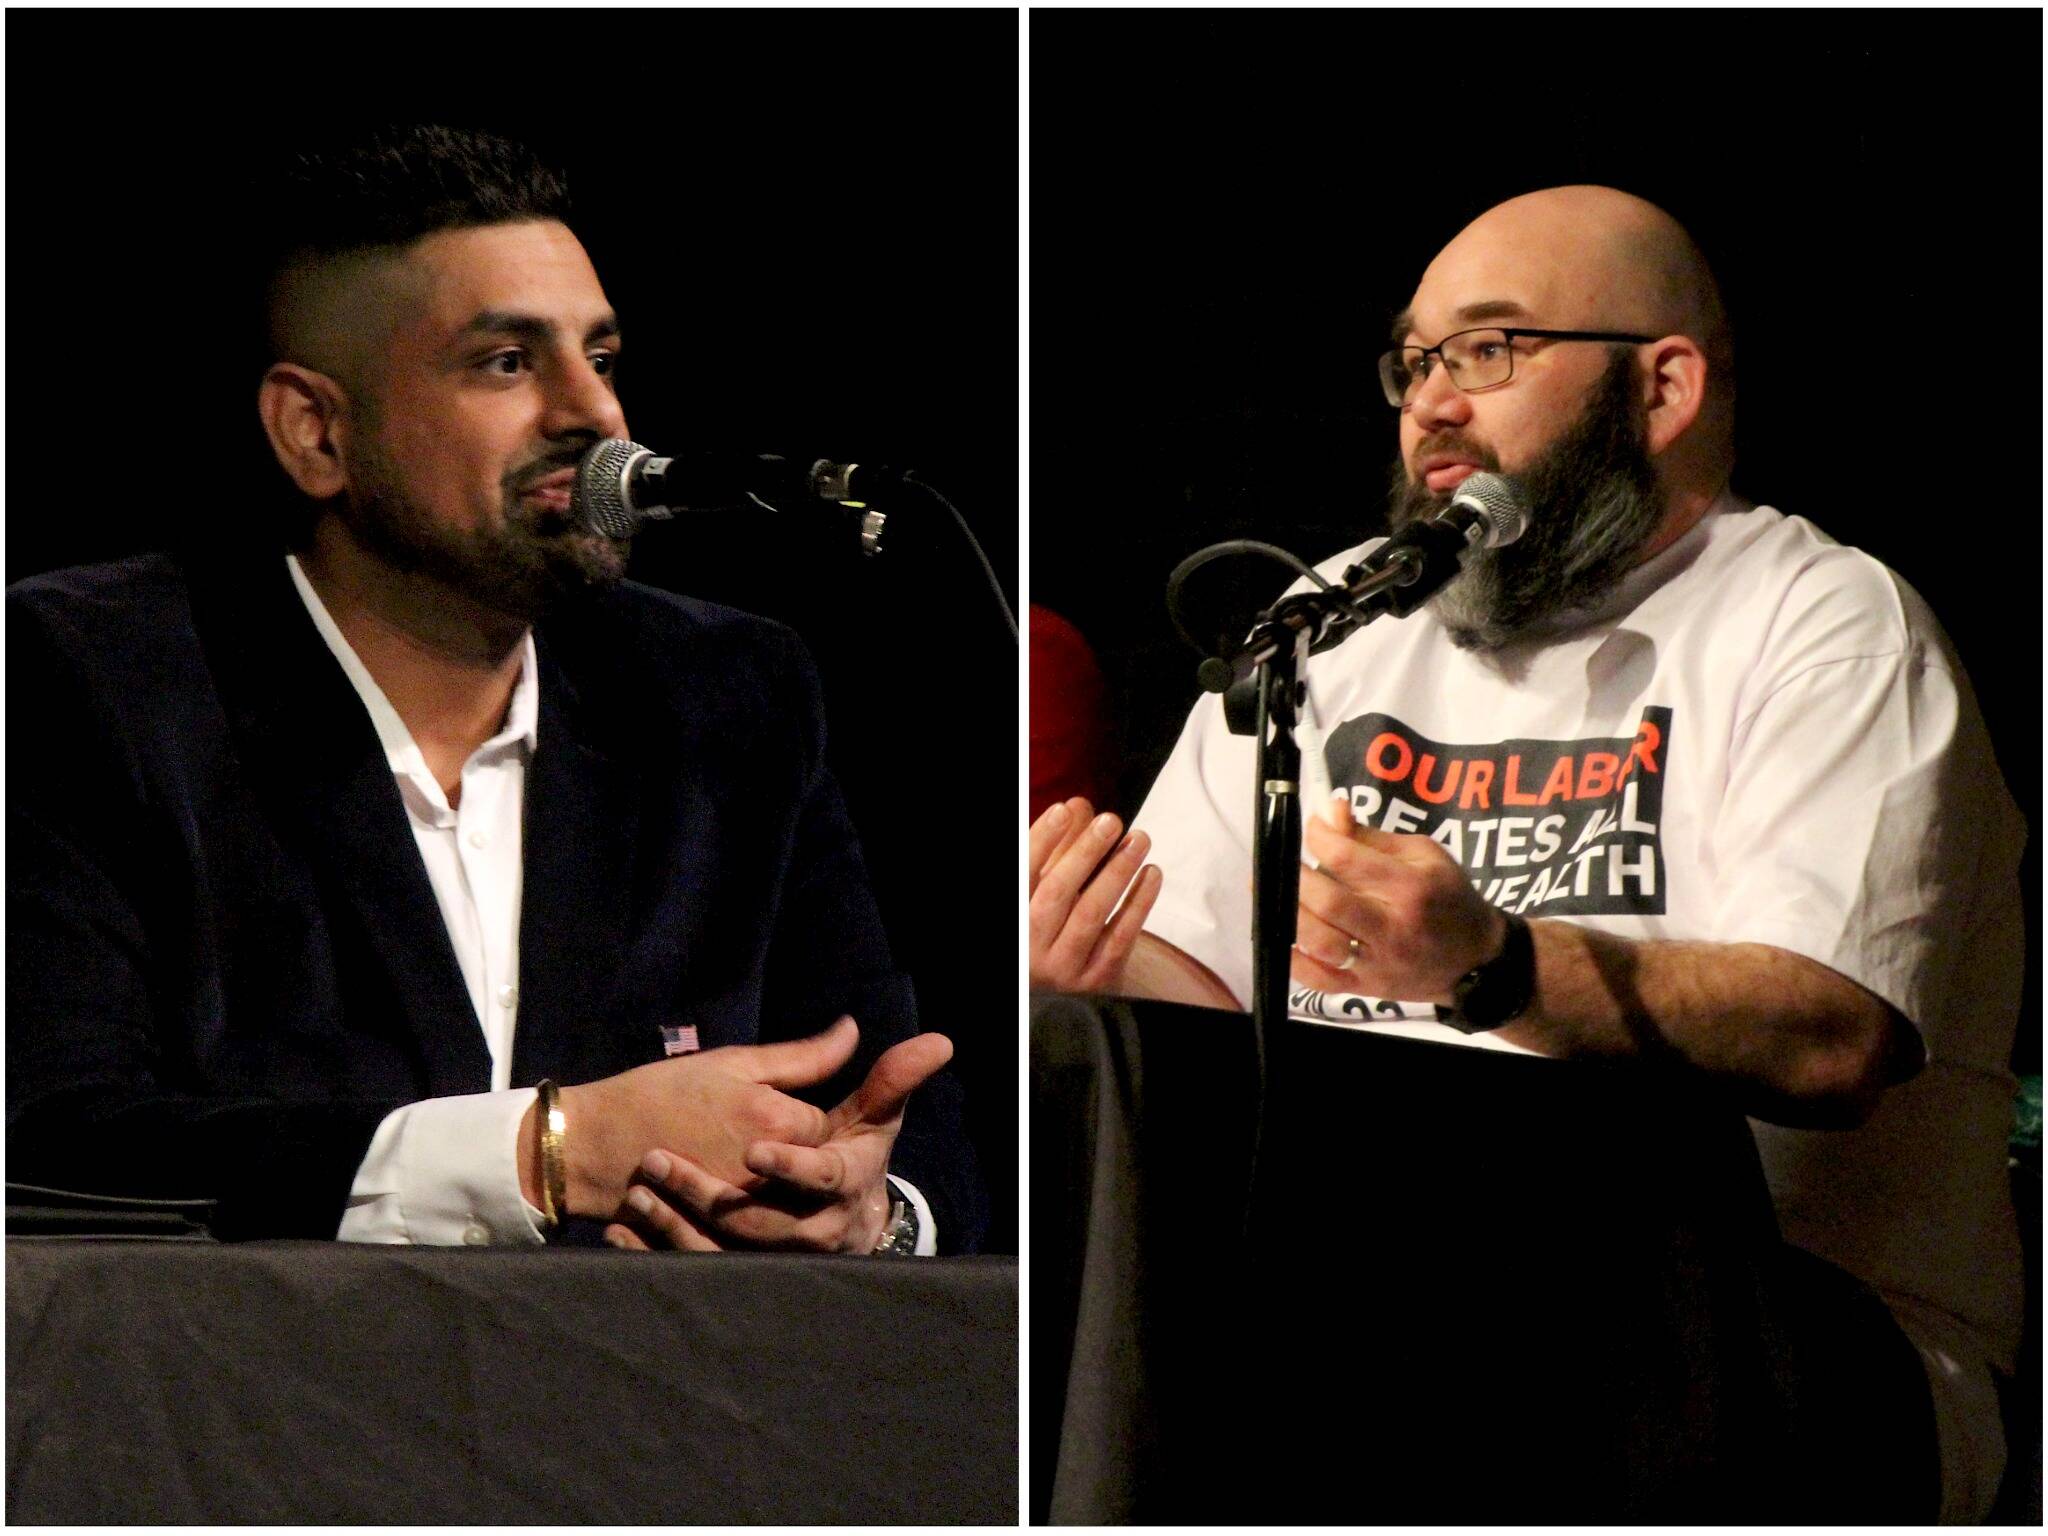 Ramandeep Mann (left) spoke against the Raise the Wage ballot initiative as Michael Westgaard (right) spoke for it during a forum Jan. 31 at Carco Theatre in Renton. (Photo by Bailey Jo Josie/Sound Publishing)